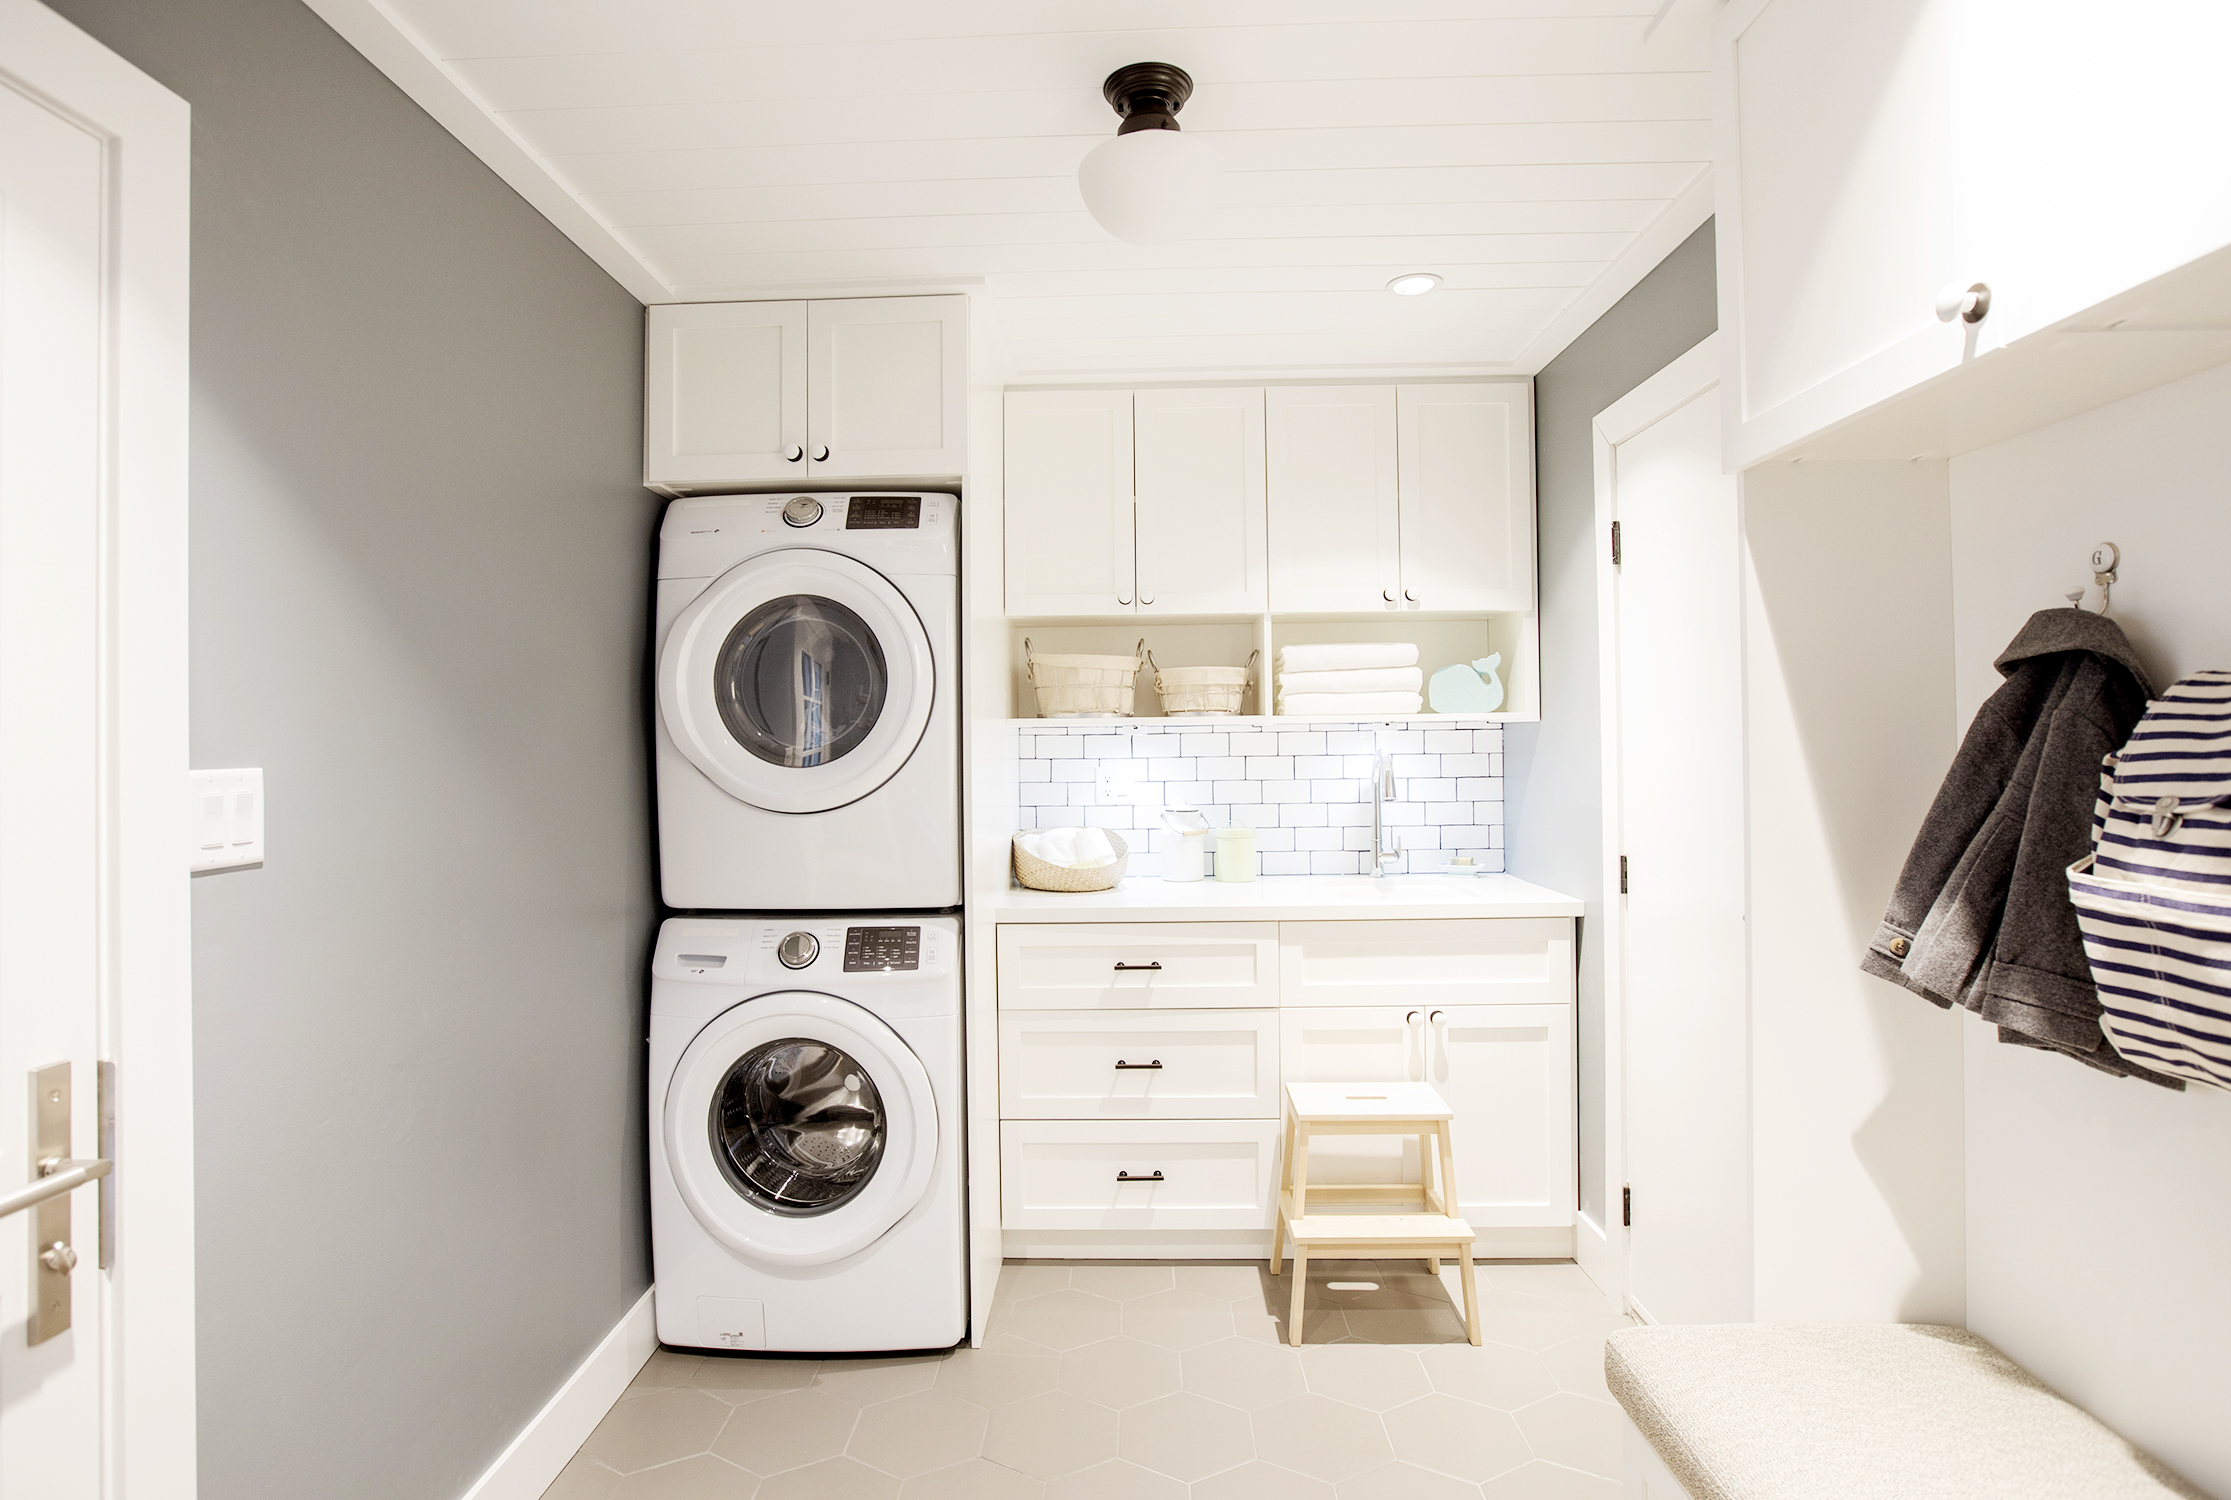 19 Clever DIY Laundry Room Ideas